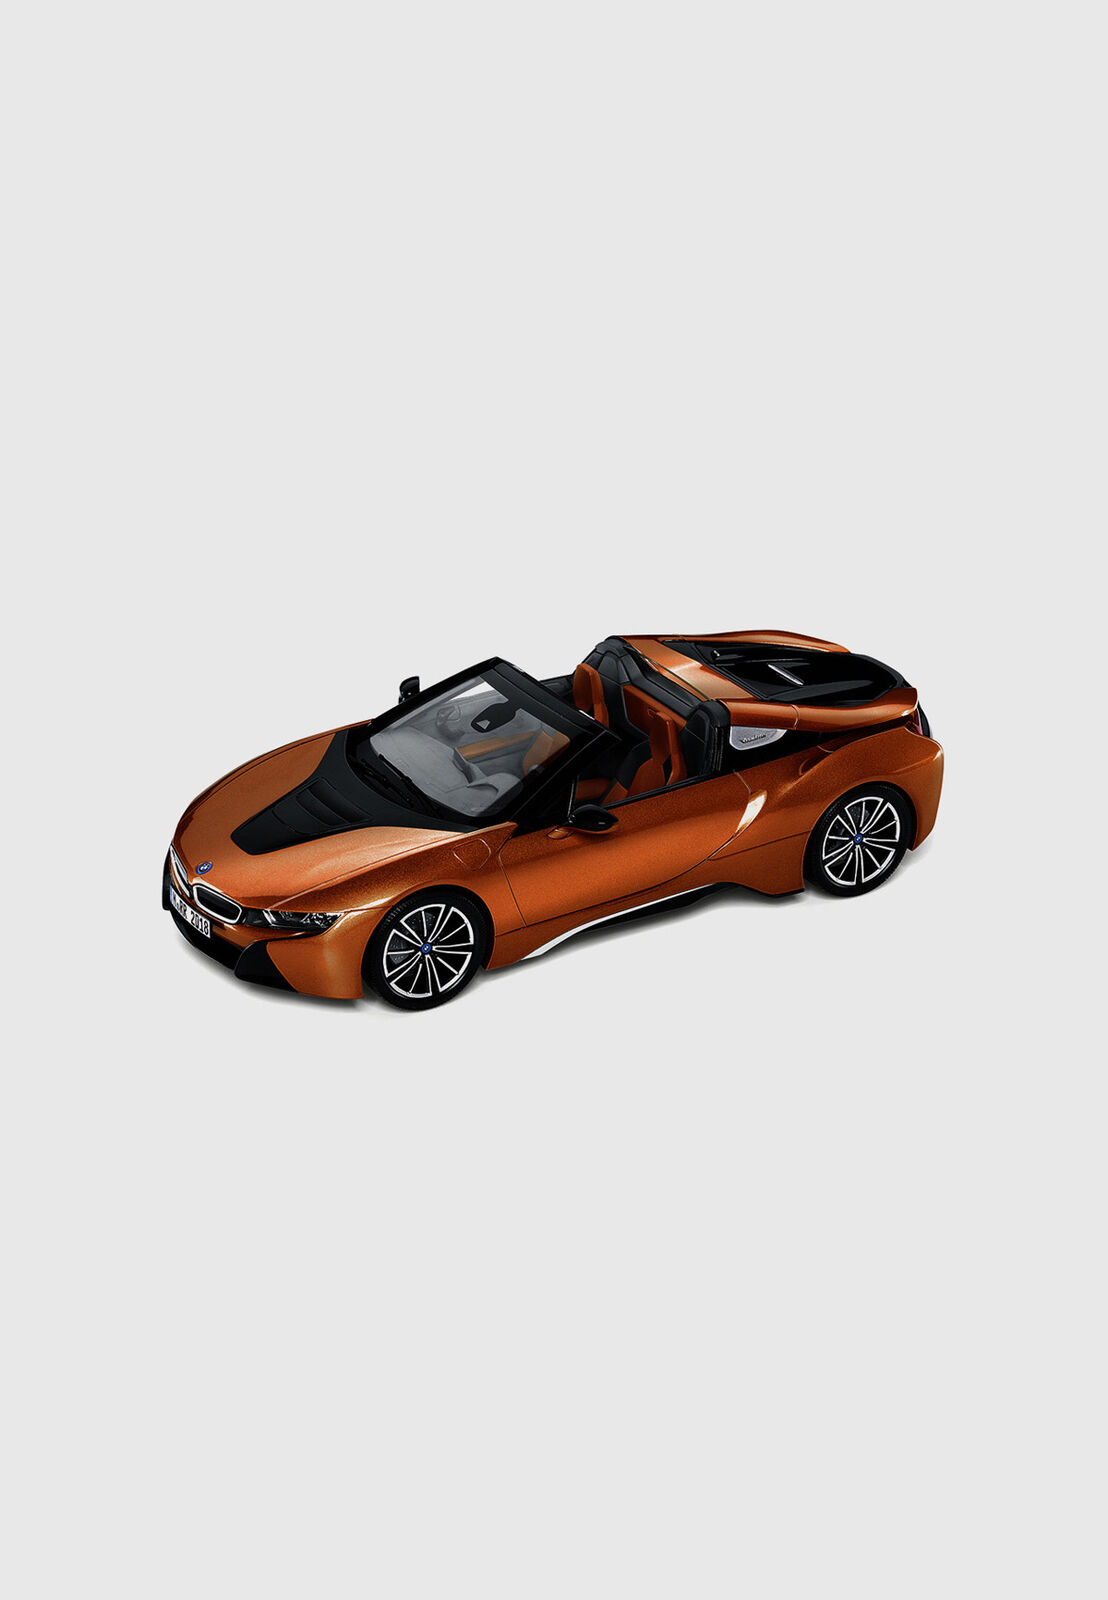 in beroep gaan Blanco geest 1:12 BMW i8 Roadster Limited Edition miniatuur | BMW Lifestyle Store